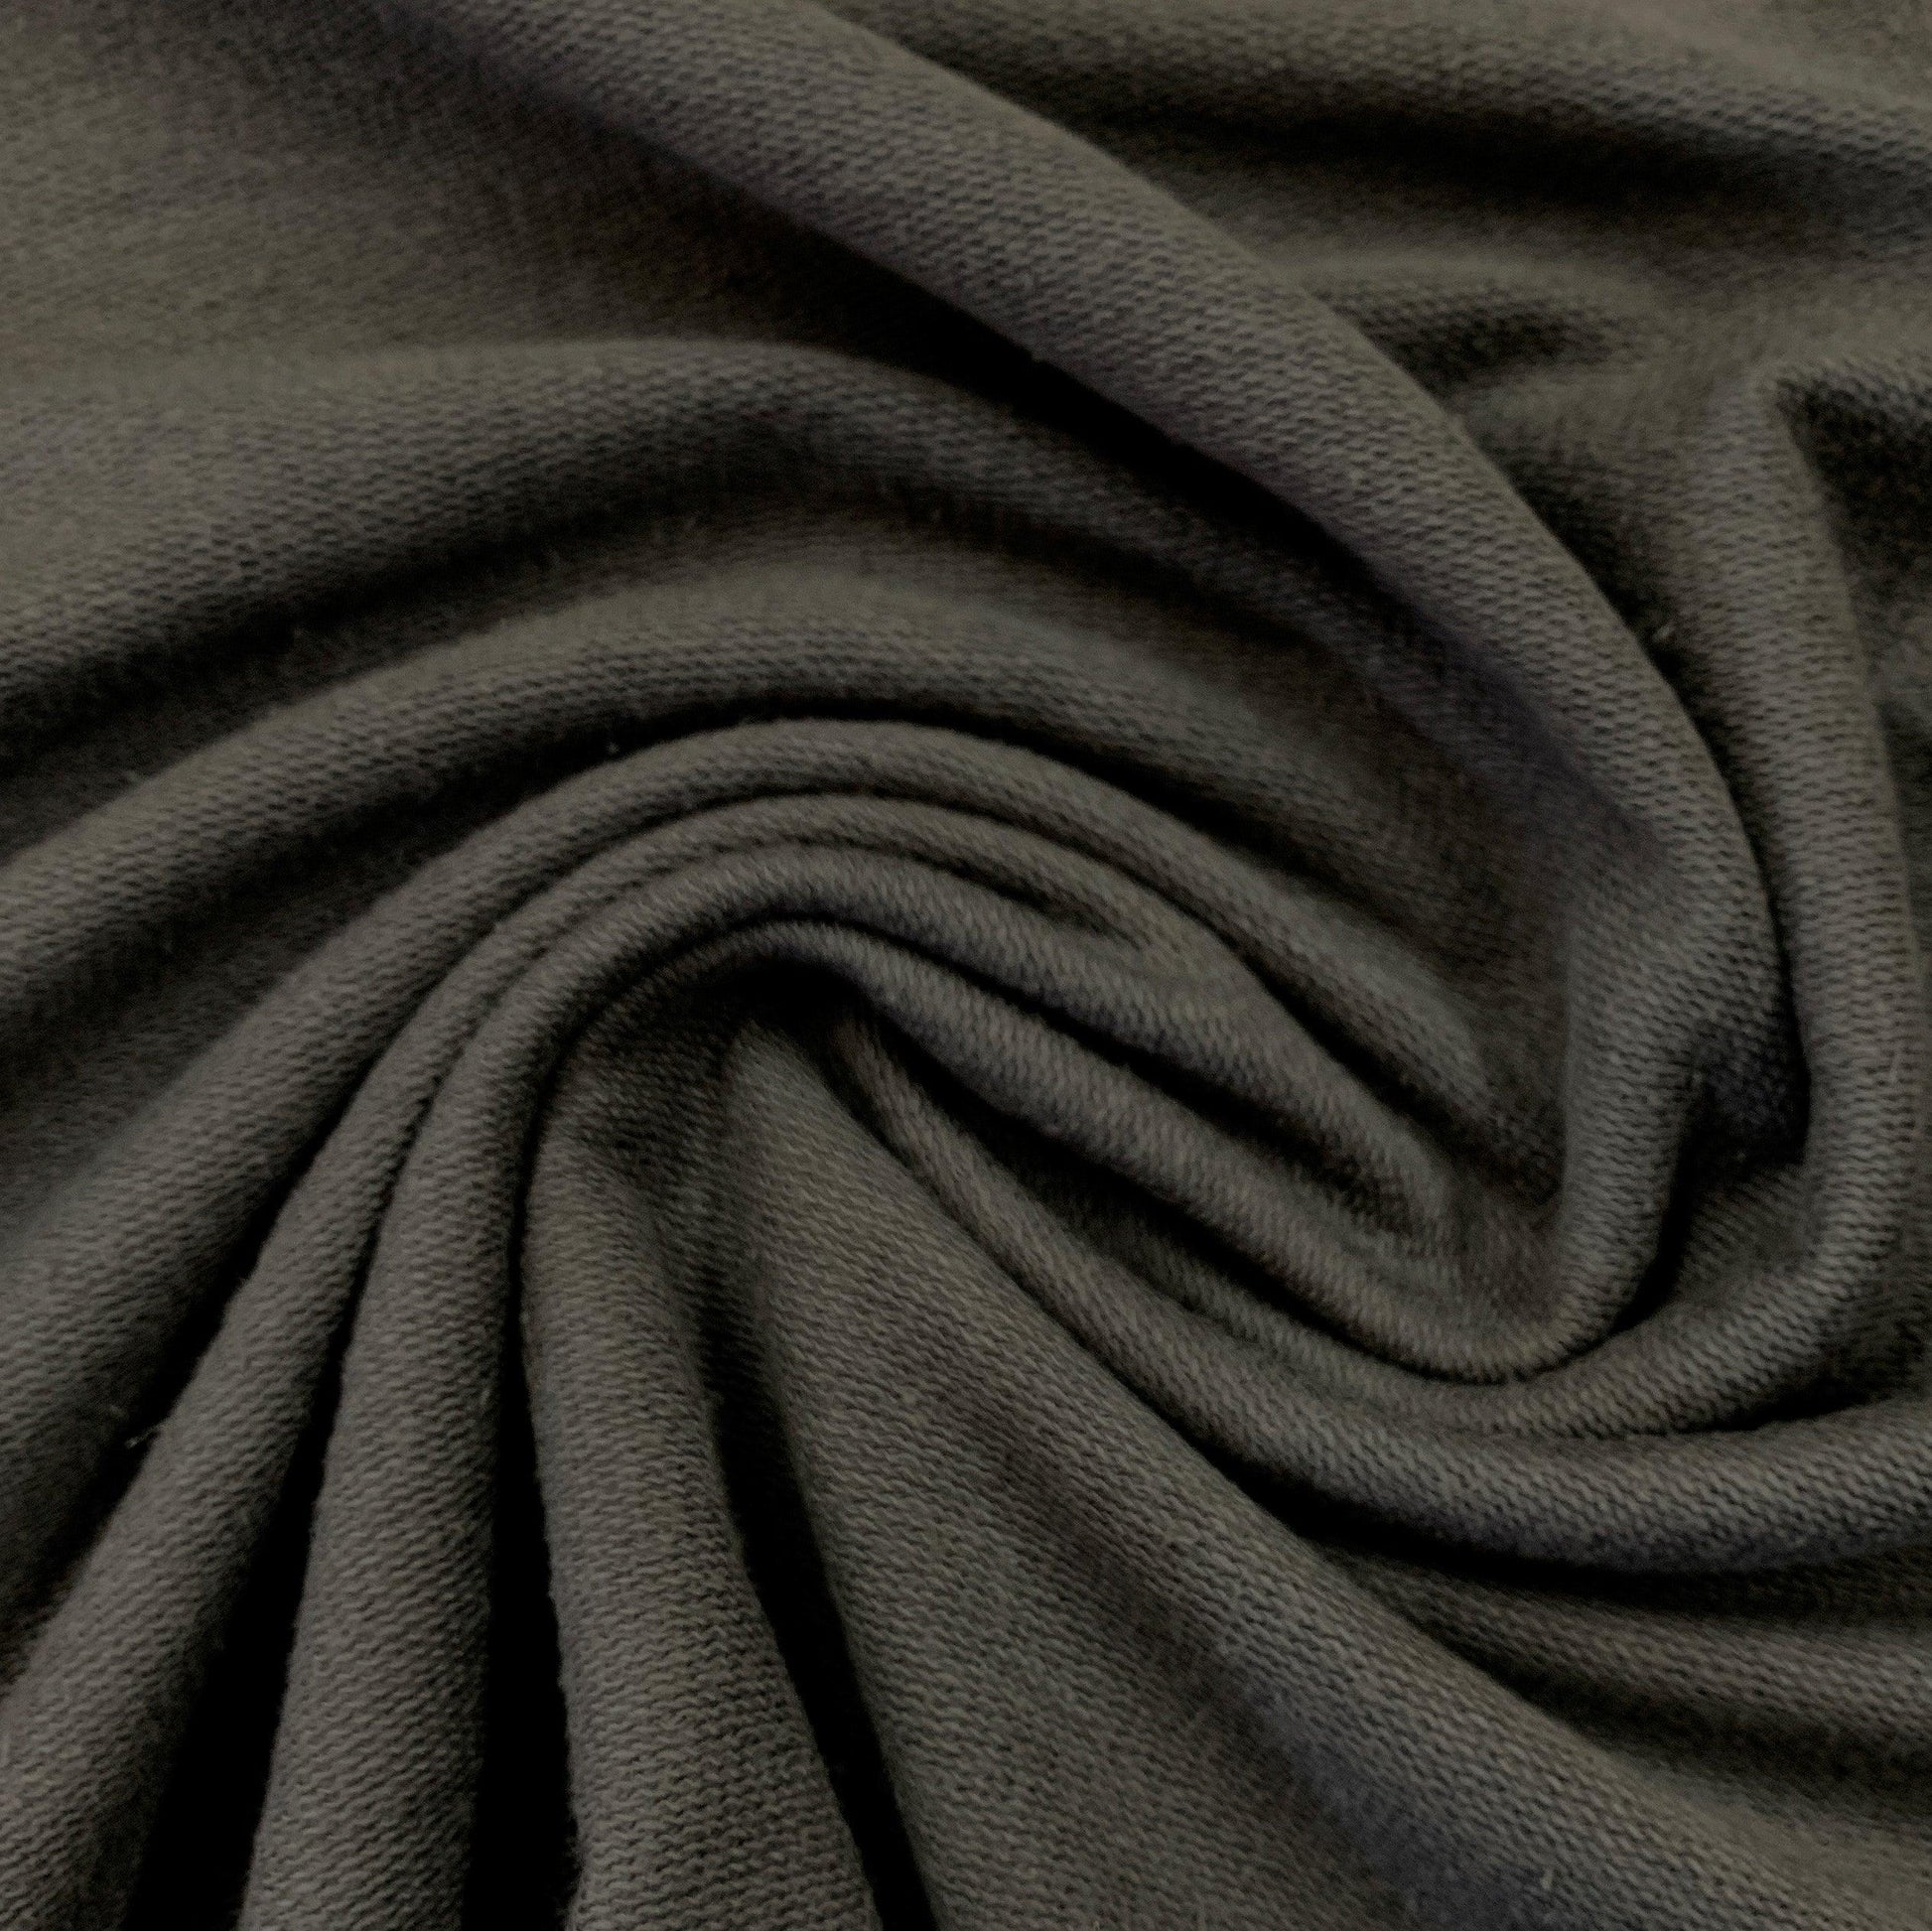 Black Medium Weight Organic Cotton French Terry Fabric - Grown in the USA